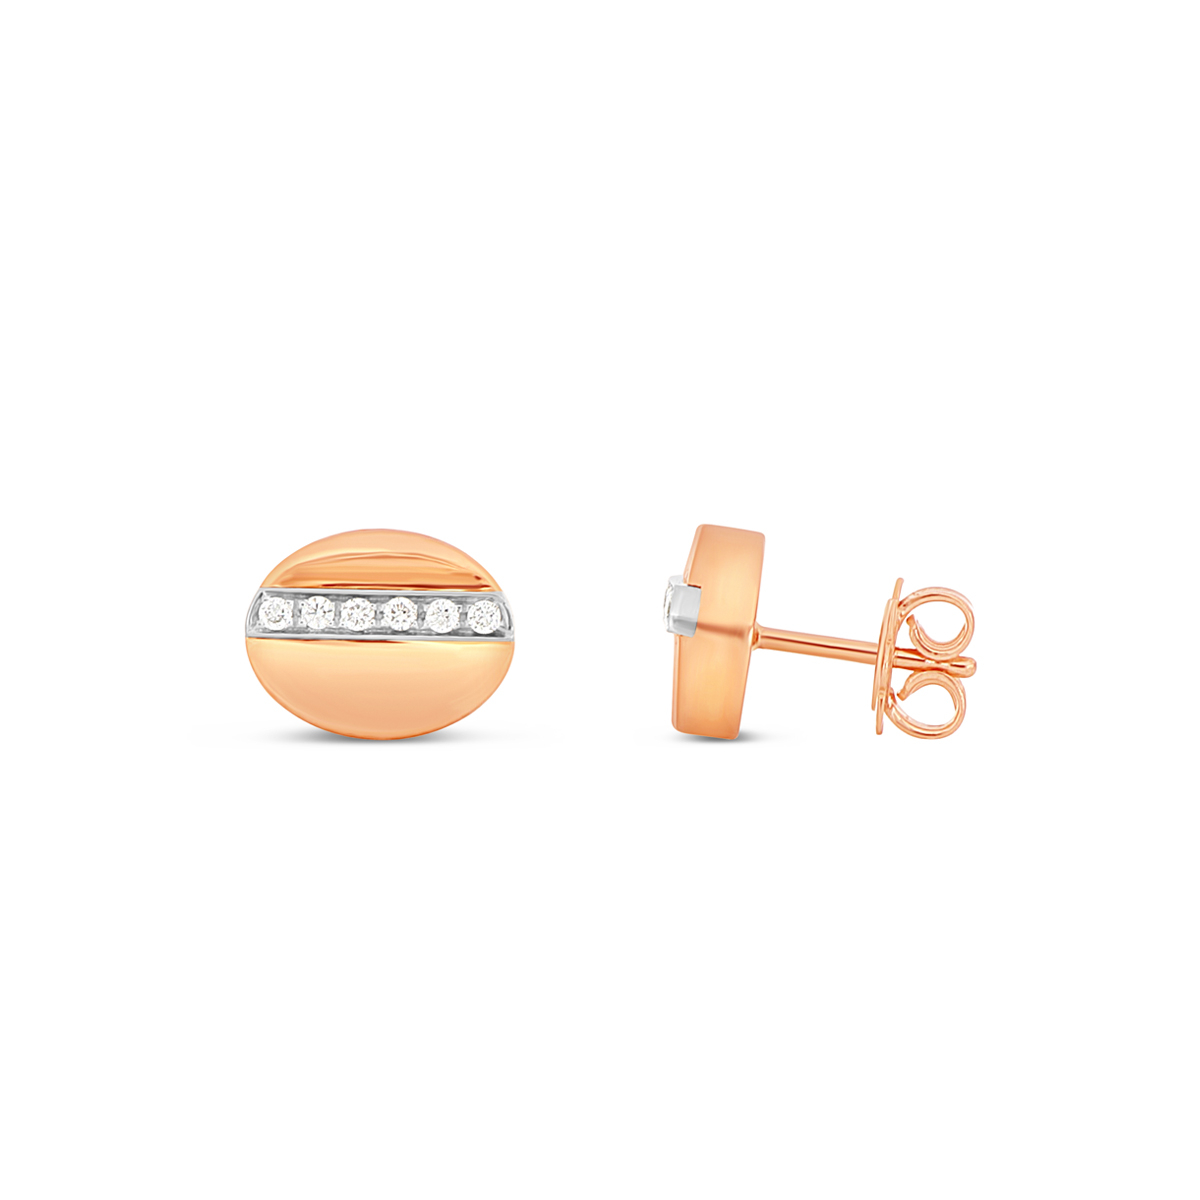 Round 18 K Rose Gold Stud Earrings with White Diamonds